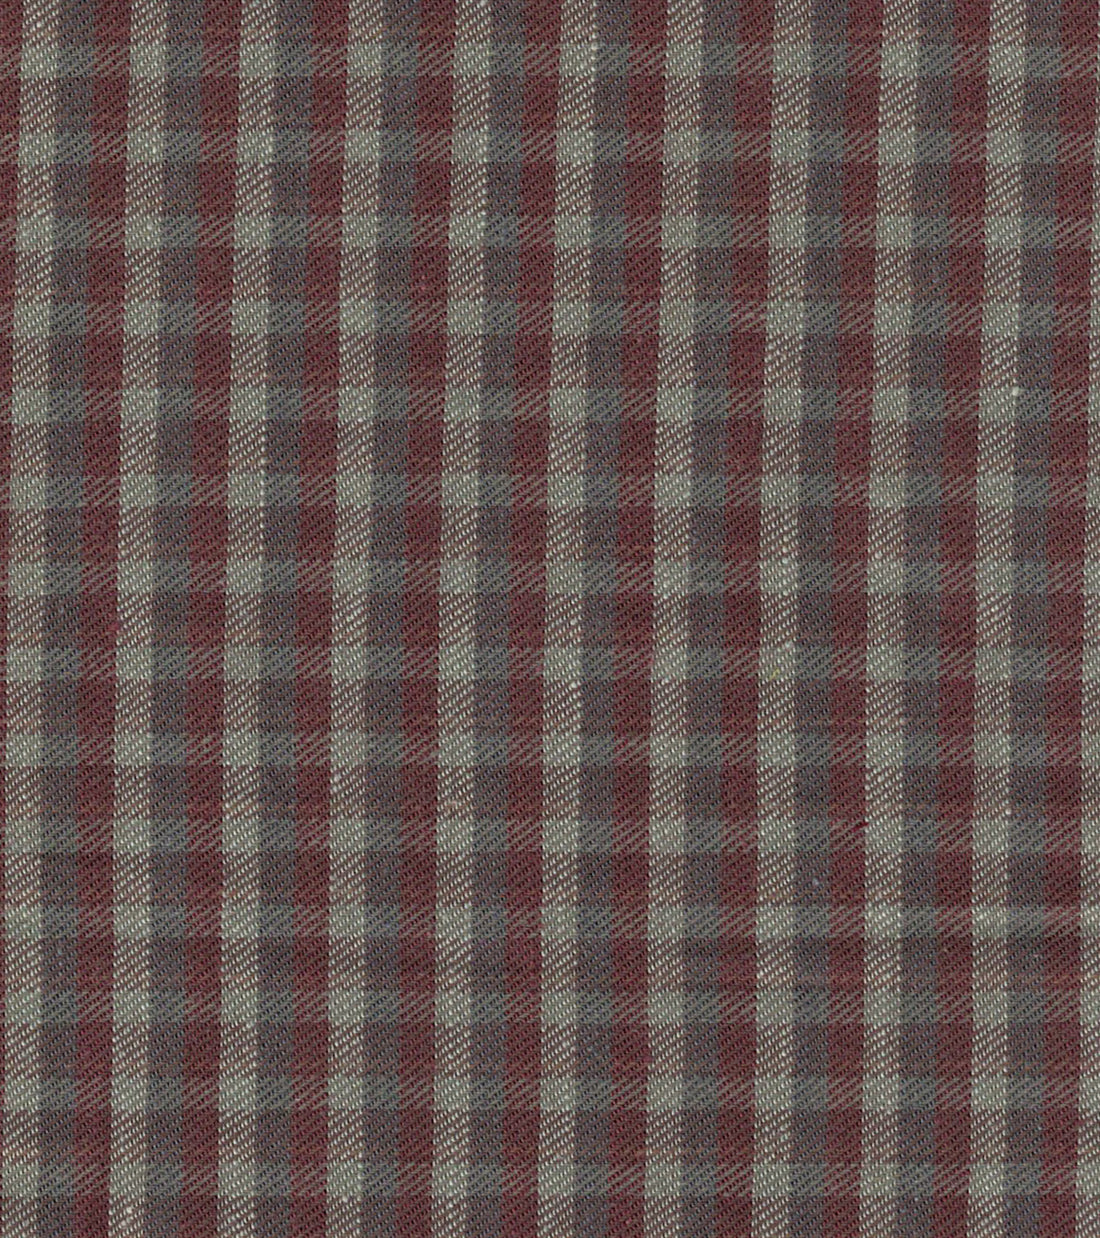 Bryceland’s Frogged Button Shirt Made-to-order Brown/Grey Check